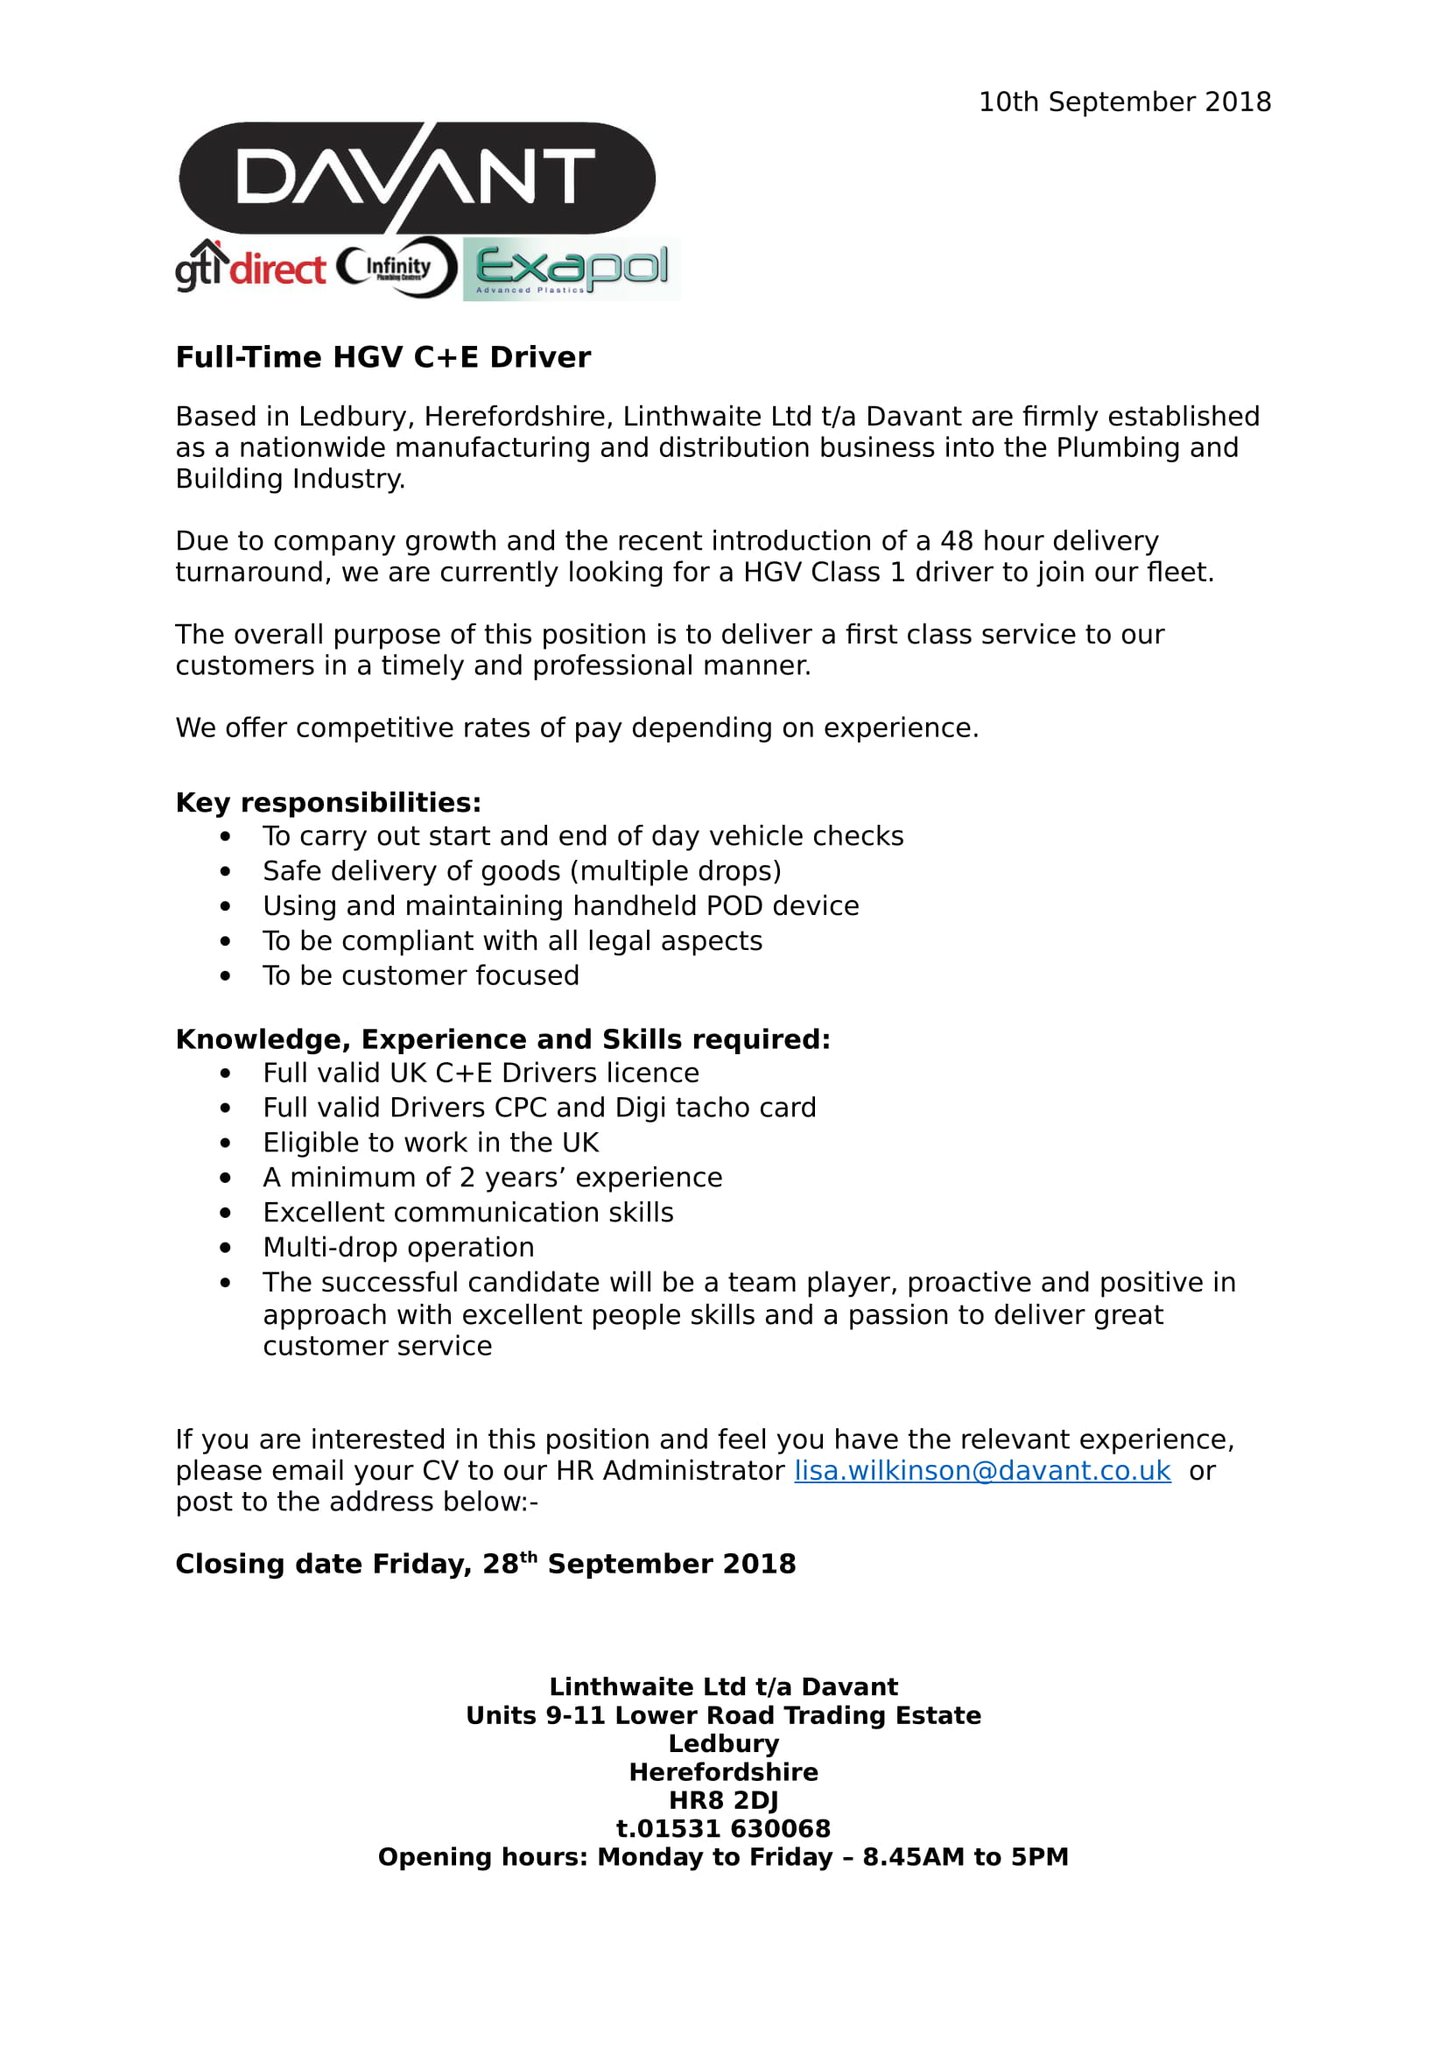 Davant On Twitter Employment Opportunity Full Time Hgv C E Driver Due To Company Growth And The Recent Introduction Of A 48 Hour Delivery Turnaround We Are Currently Looking For A Hgv Class 1